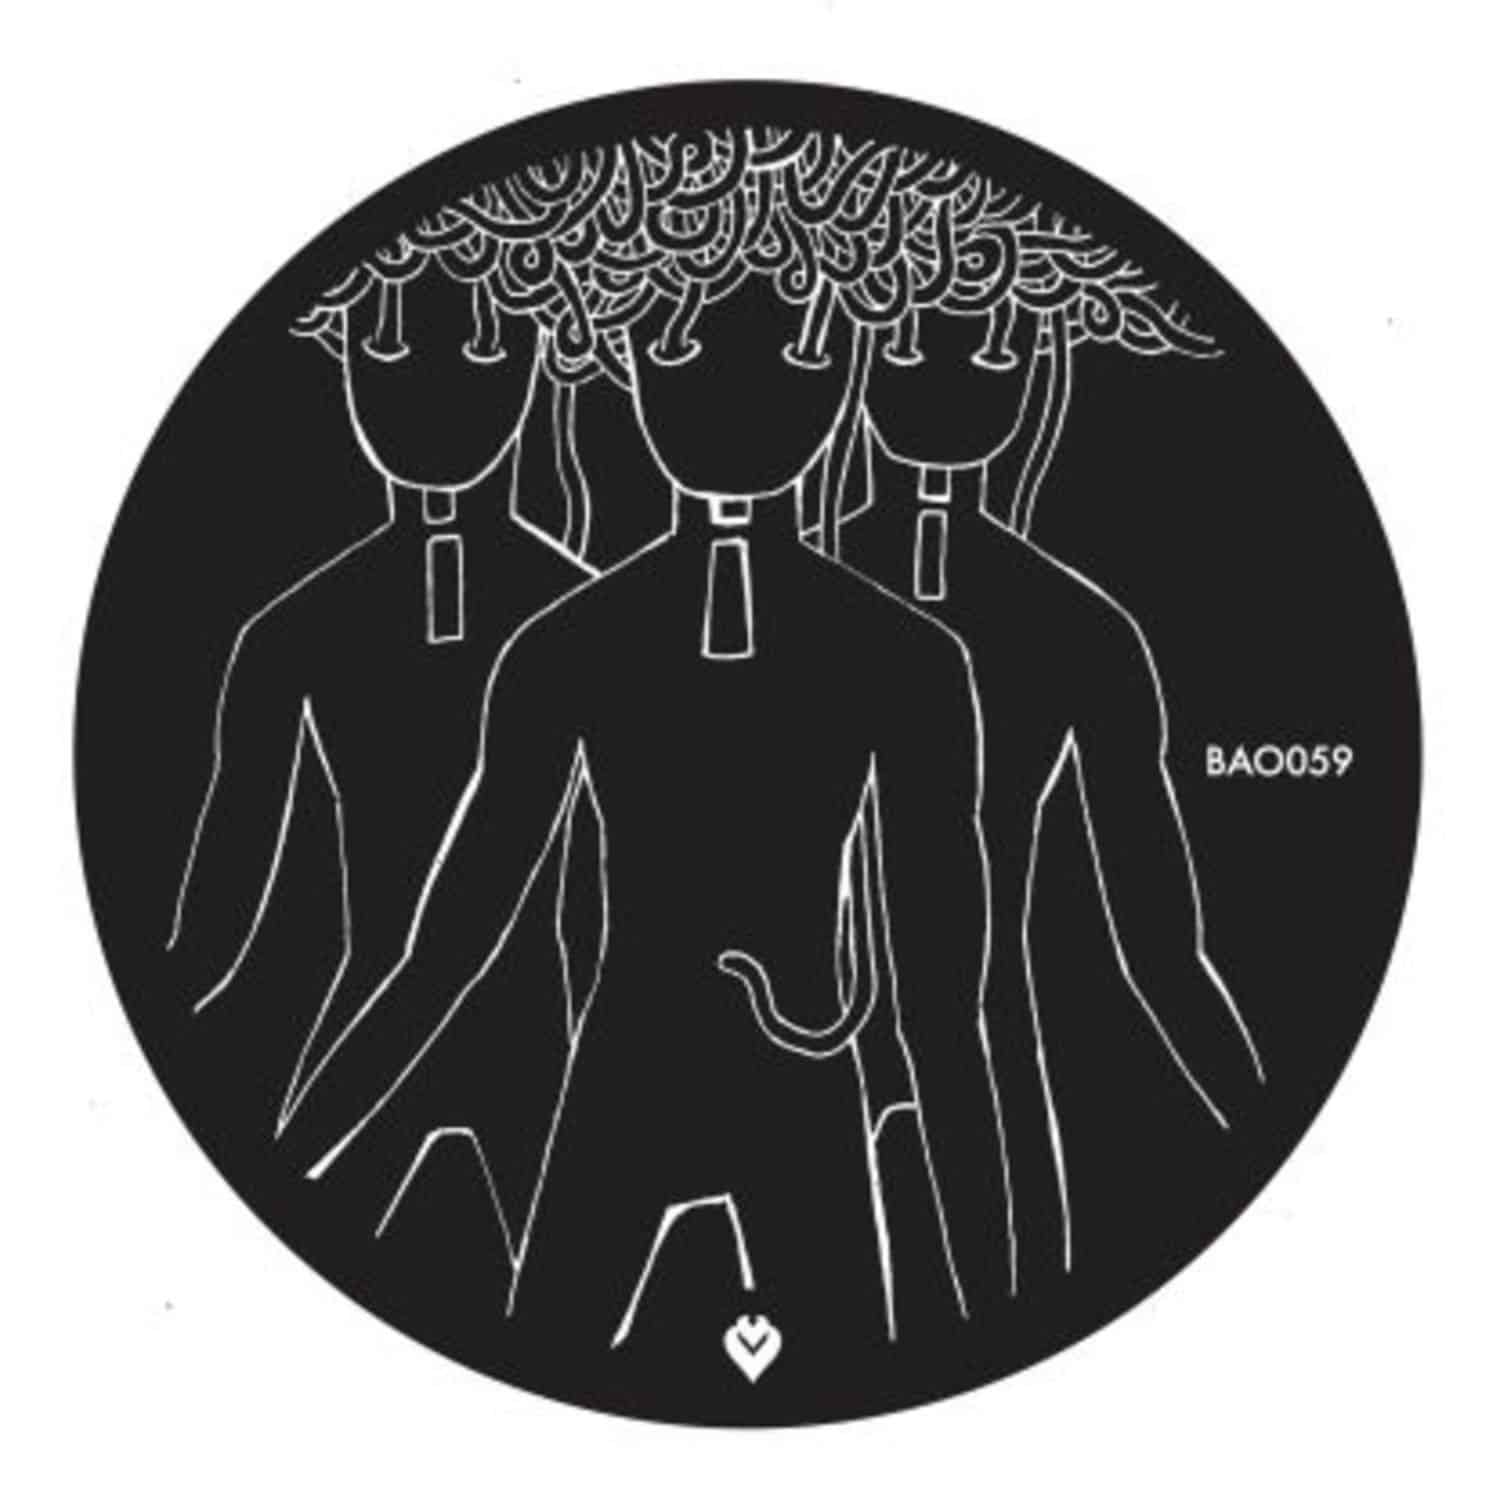 Lathe - ATHENS BY TAXI EP